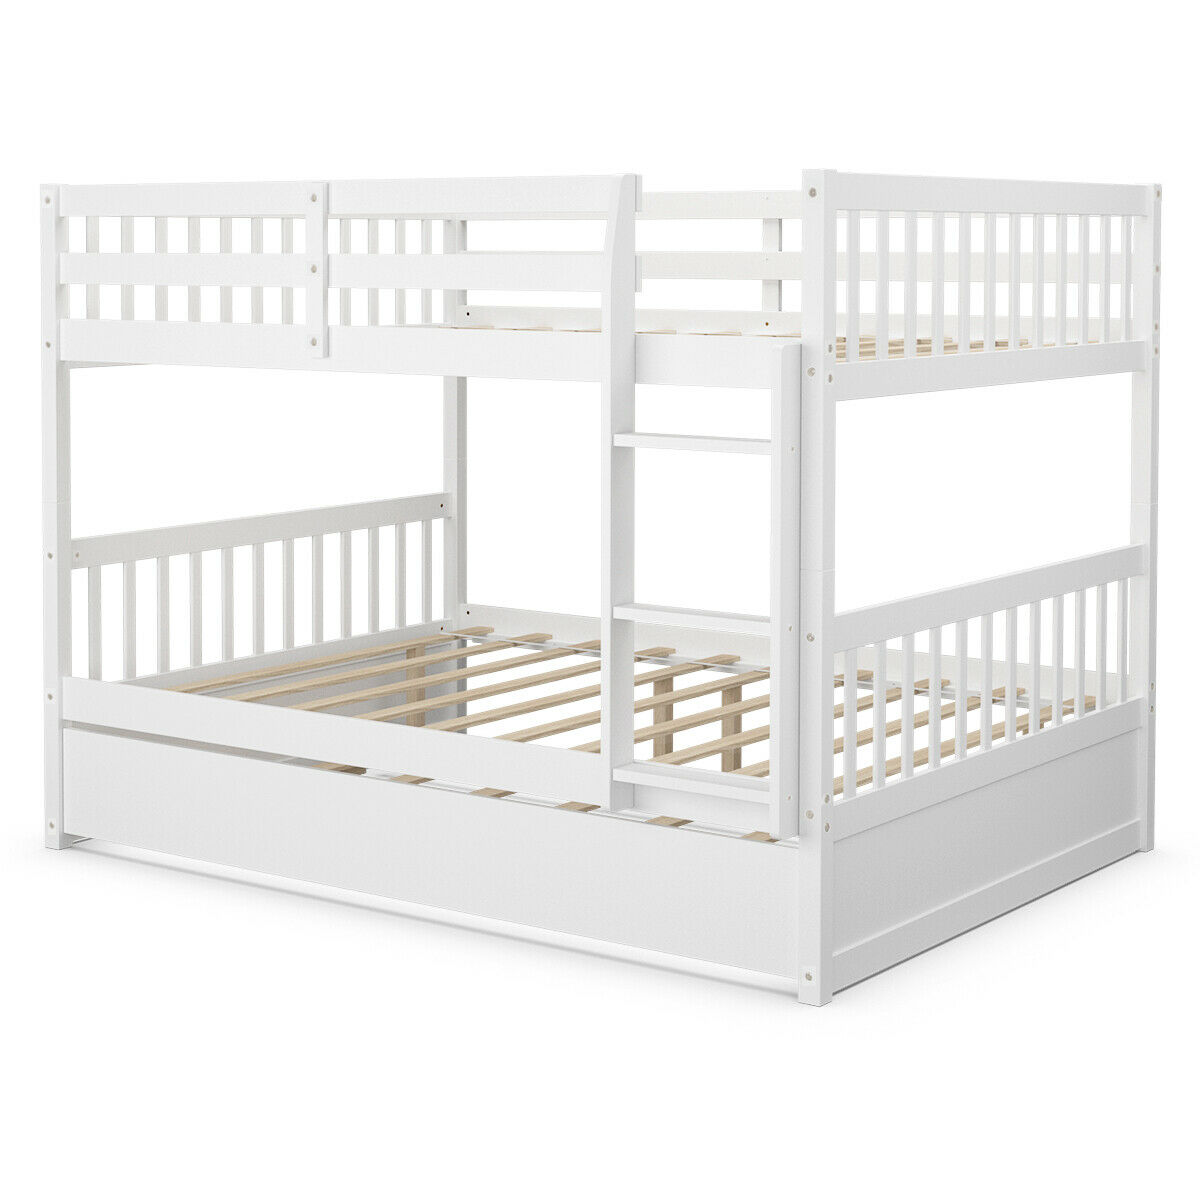 Full Bunk Bed Platform Wood, Bunk Beds With Side Rail